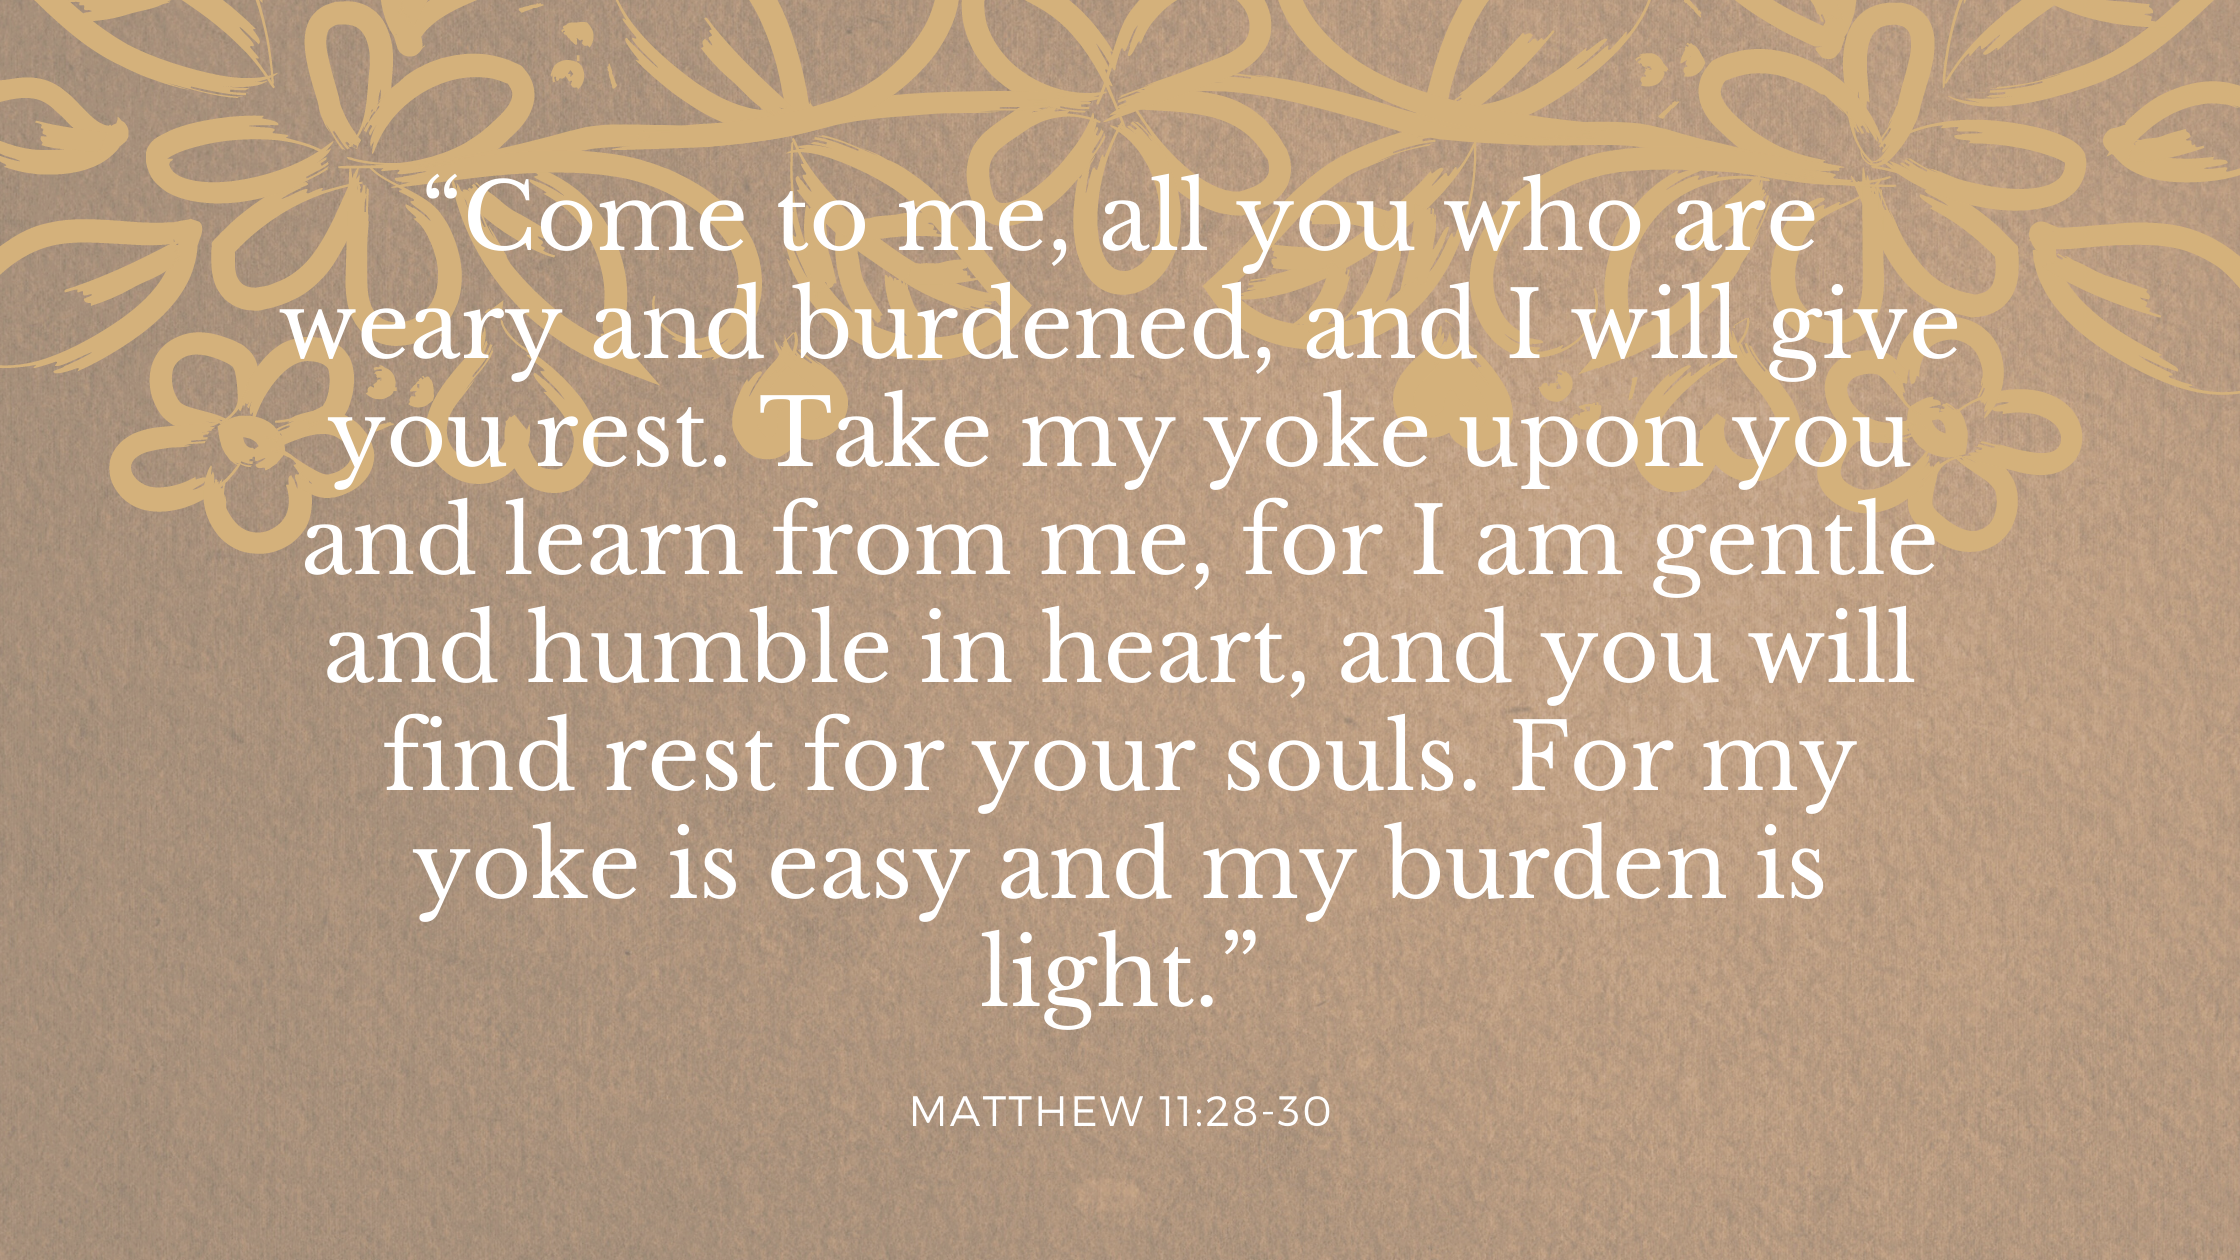 “Come to me, all you who are weary and burdened, and I will give you rest. Take my yoke upon you and learn from me, for I am gentle and humble in hear